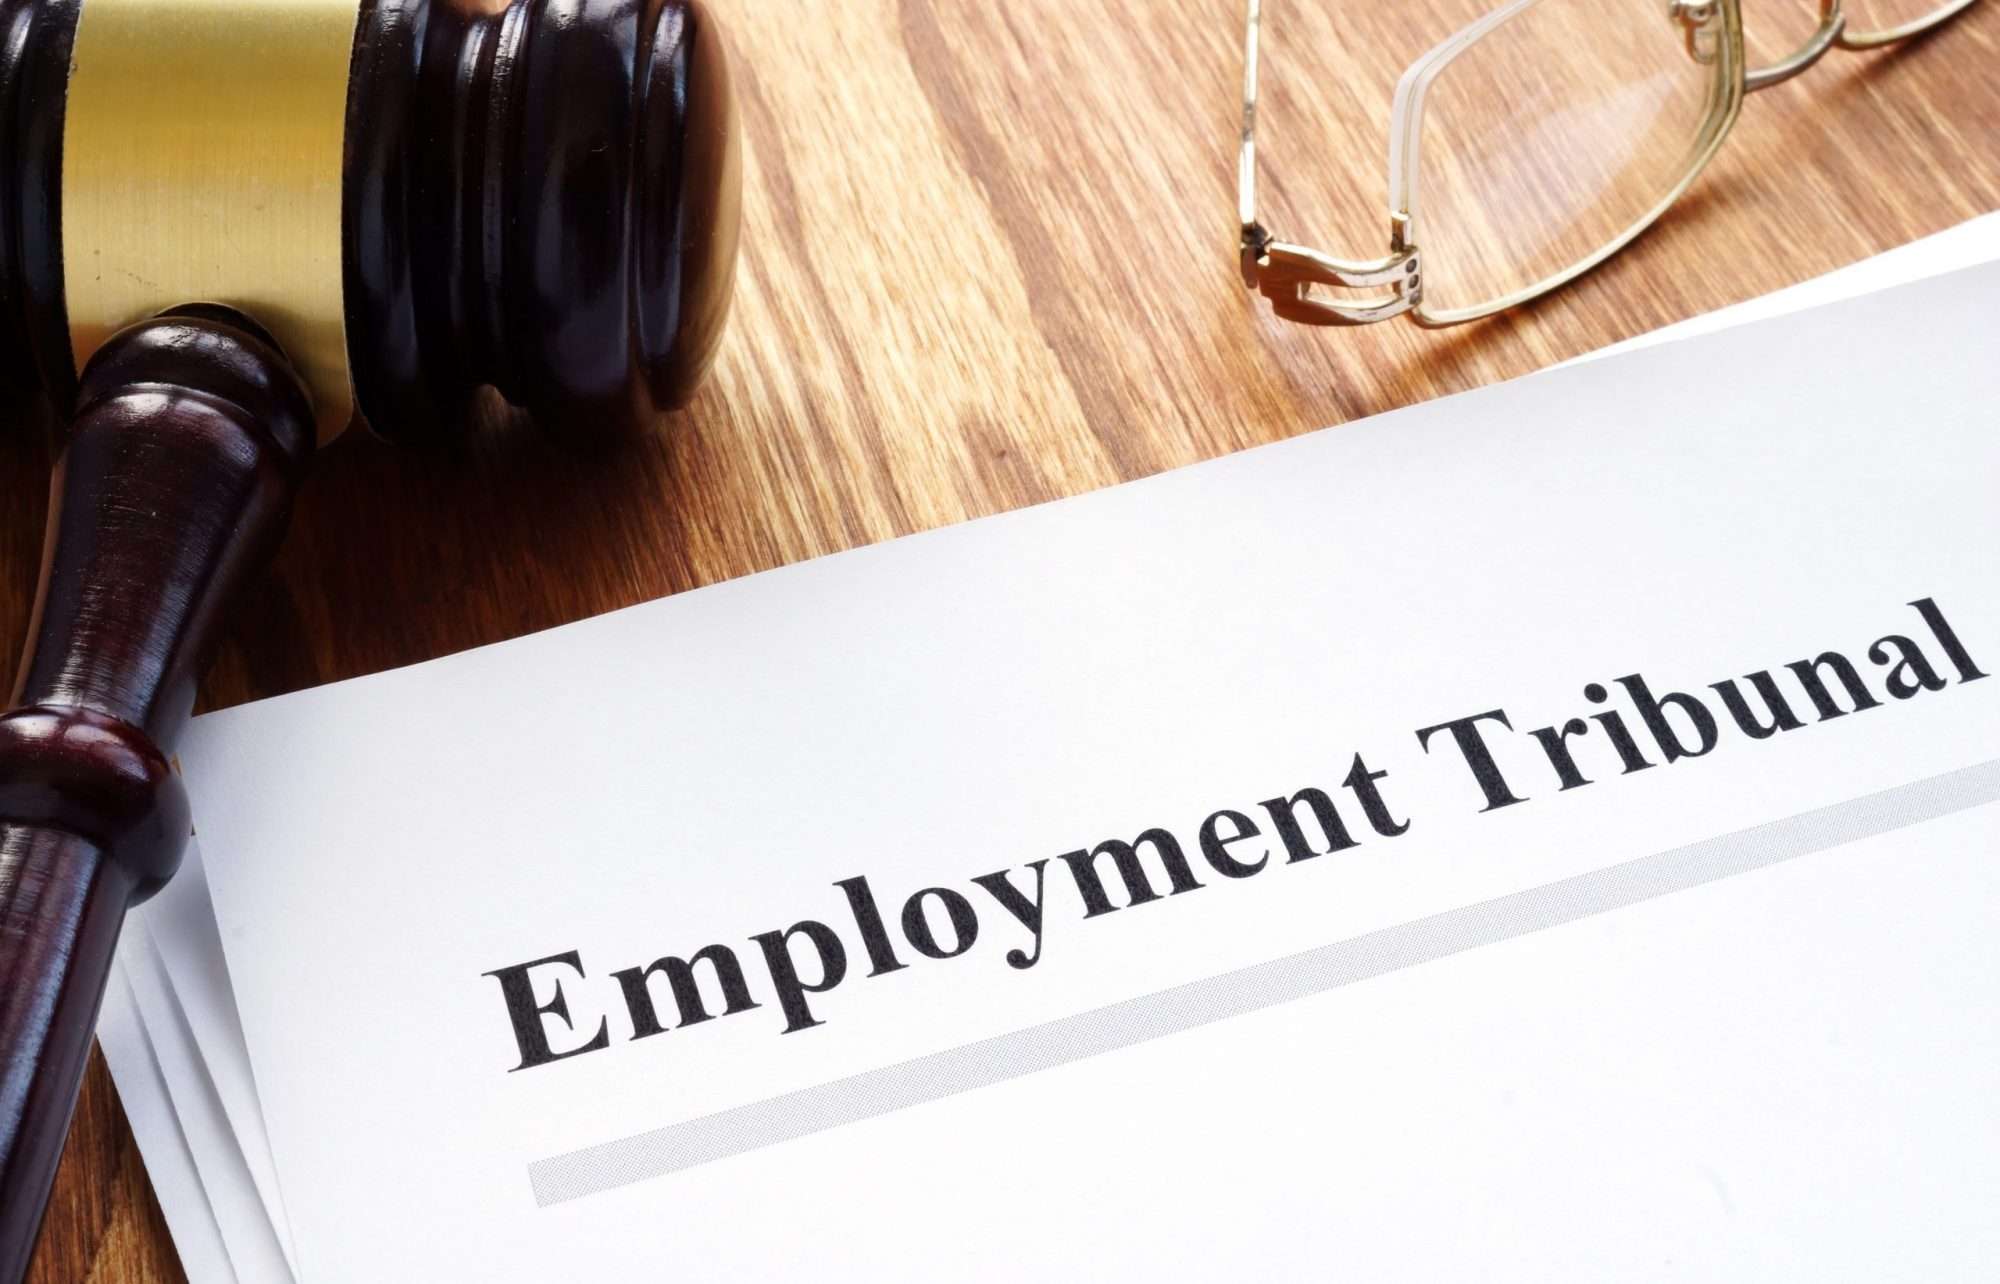 The key things an Employer should consider before deciding to settle or defend an Employment Tribunal claim